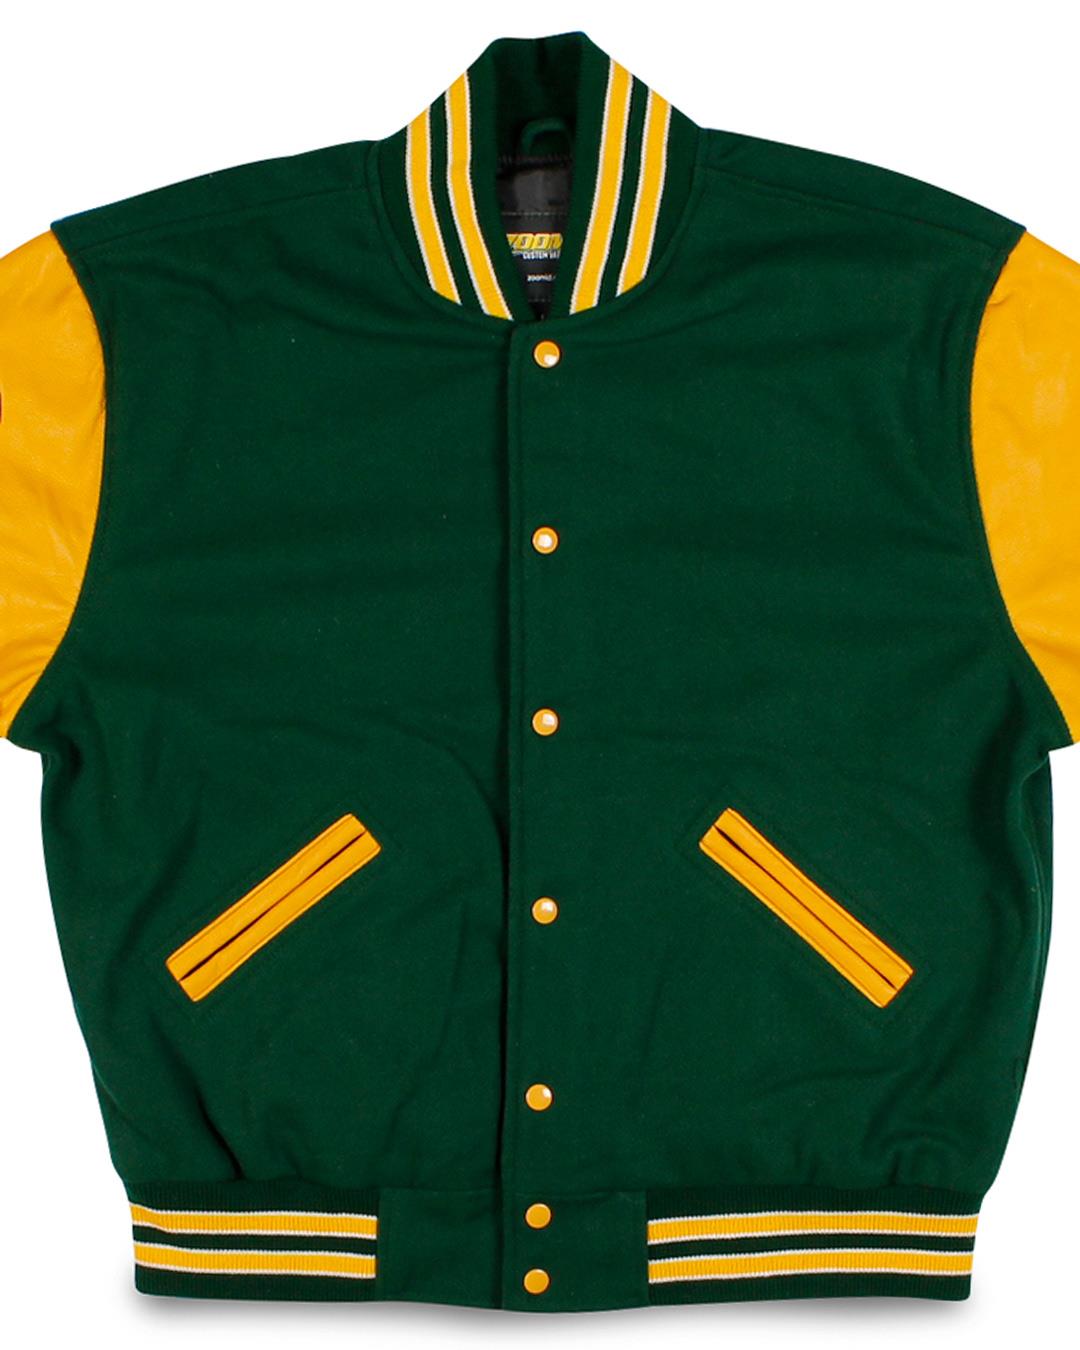 Mayfield High School Letterman Jacket, Las Cruces NM - Front